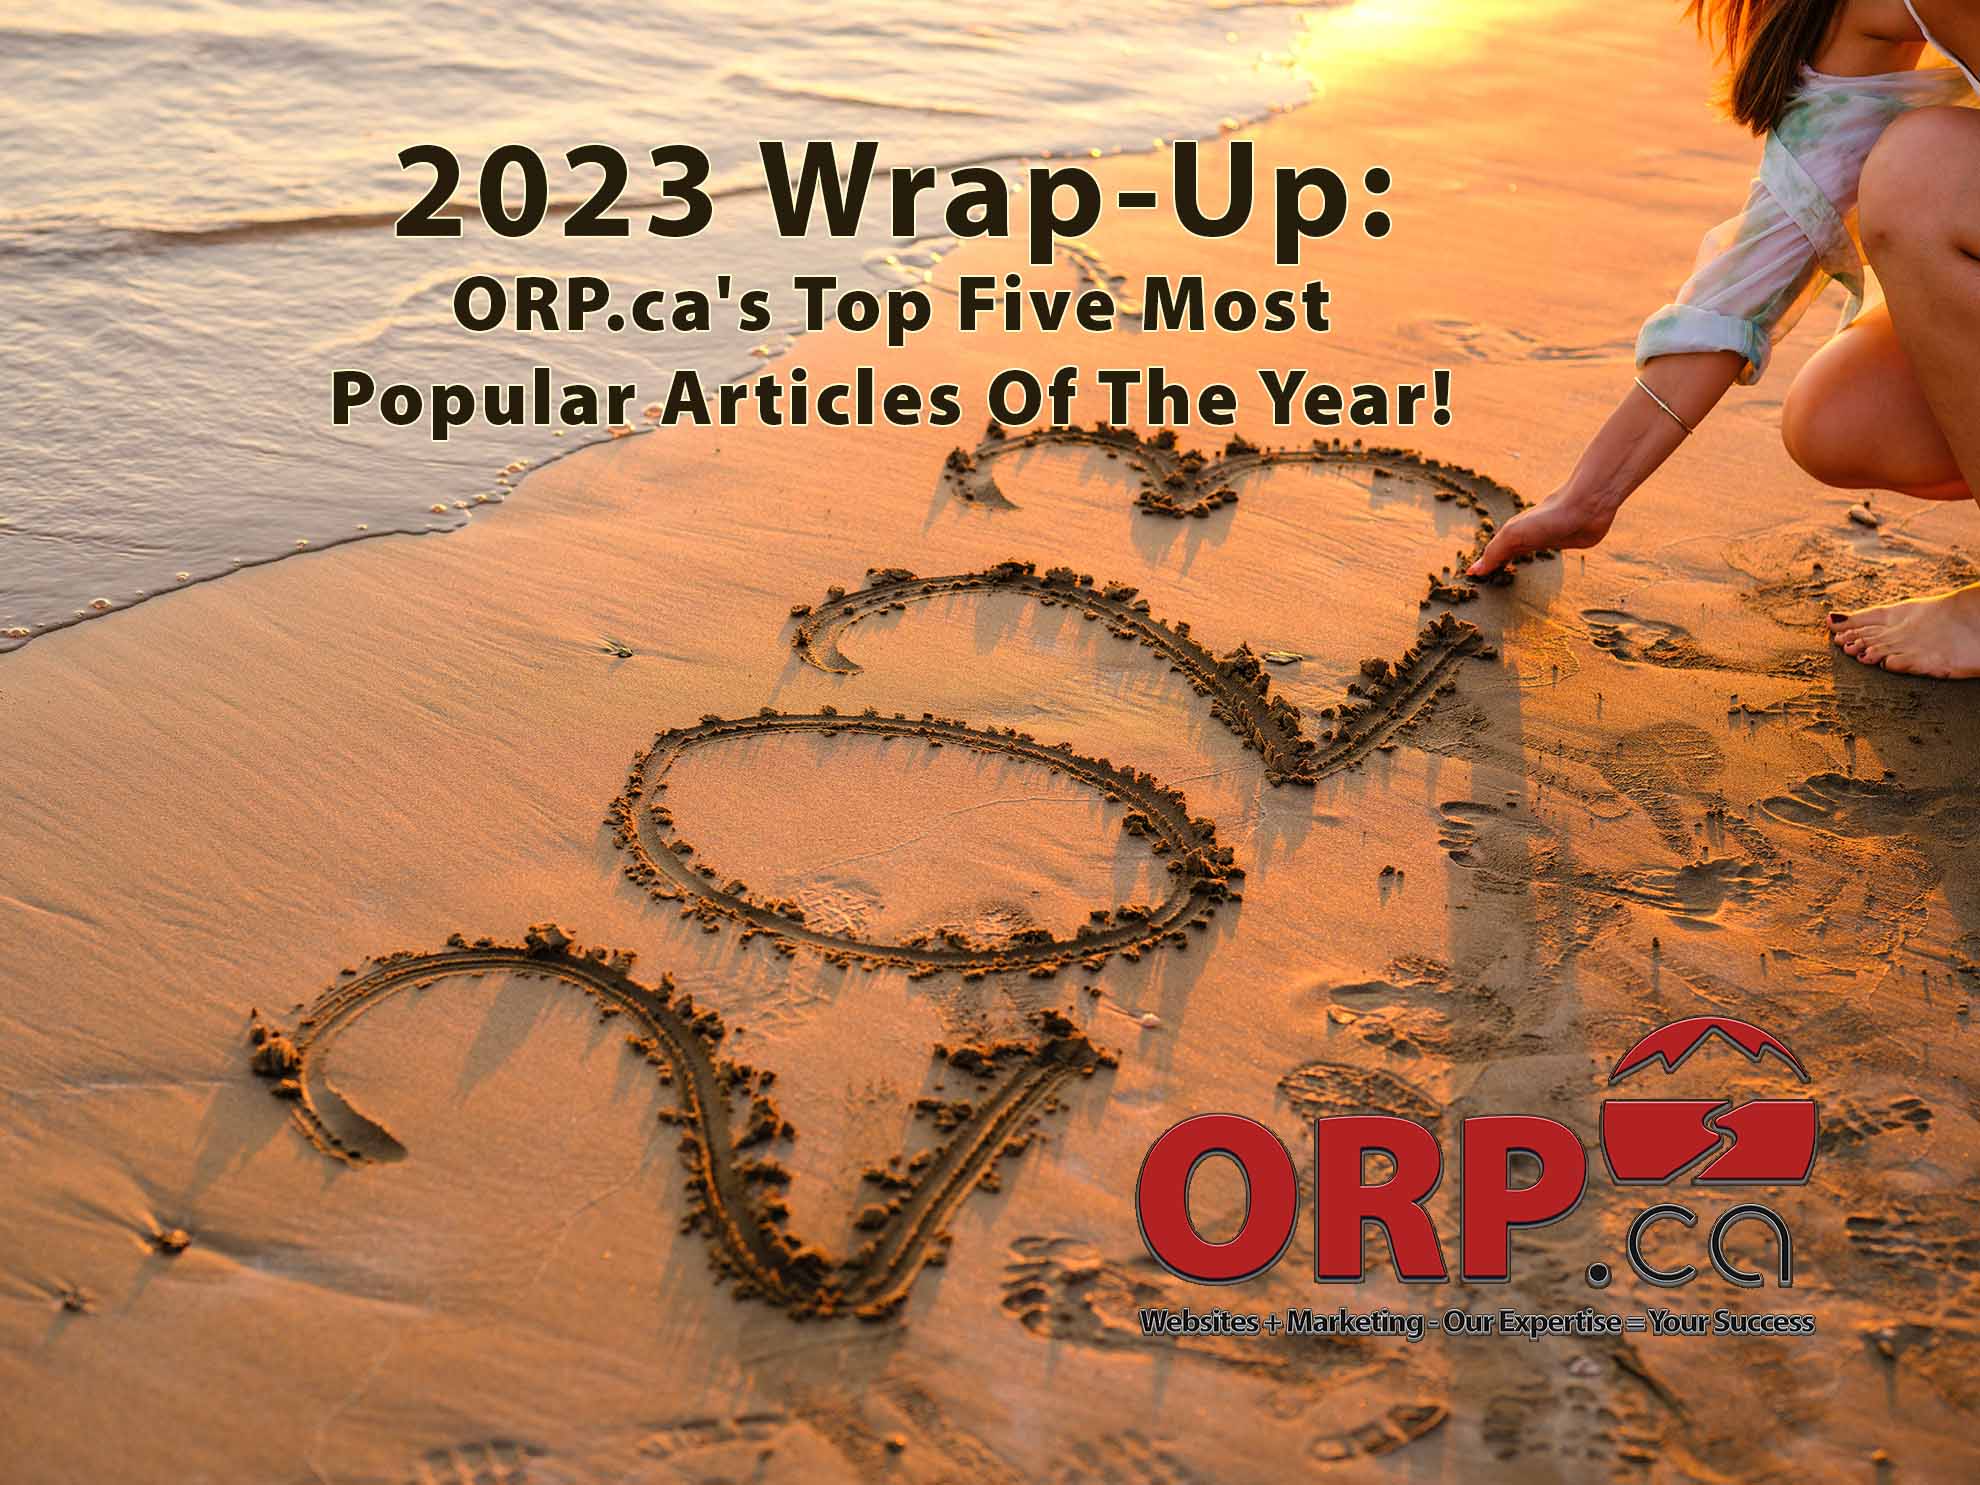 2023 Wrap Up ORP.cas Top Five Most Popular Articles Of The Year - A Digital Marketing article from ORP.ca Websites + Marketing | Our Expertise  = Your Success - Services for Small Business and Business Professionals